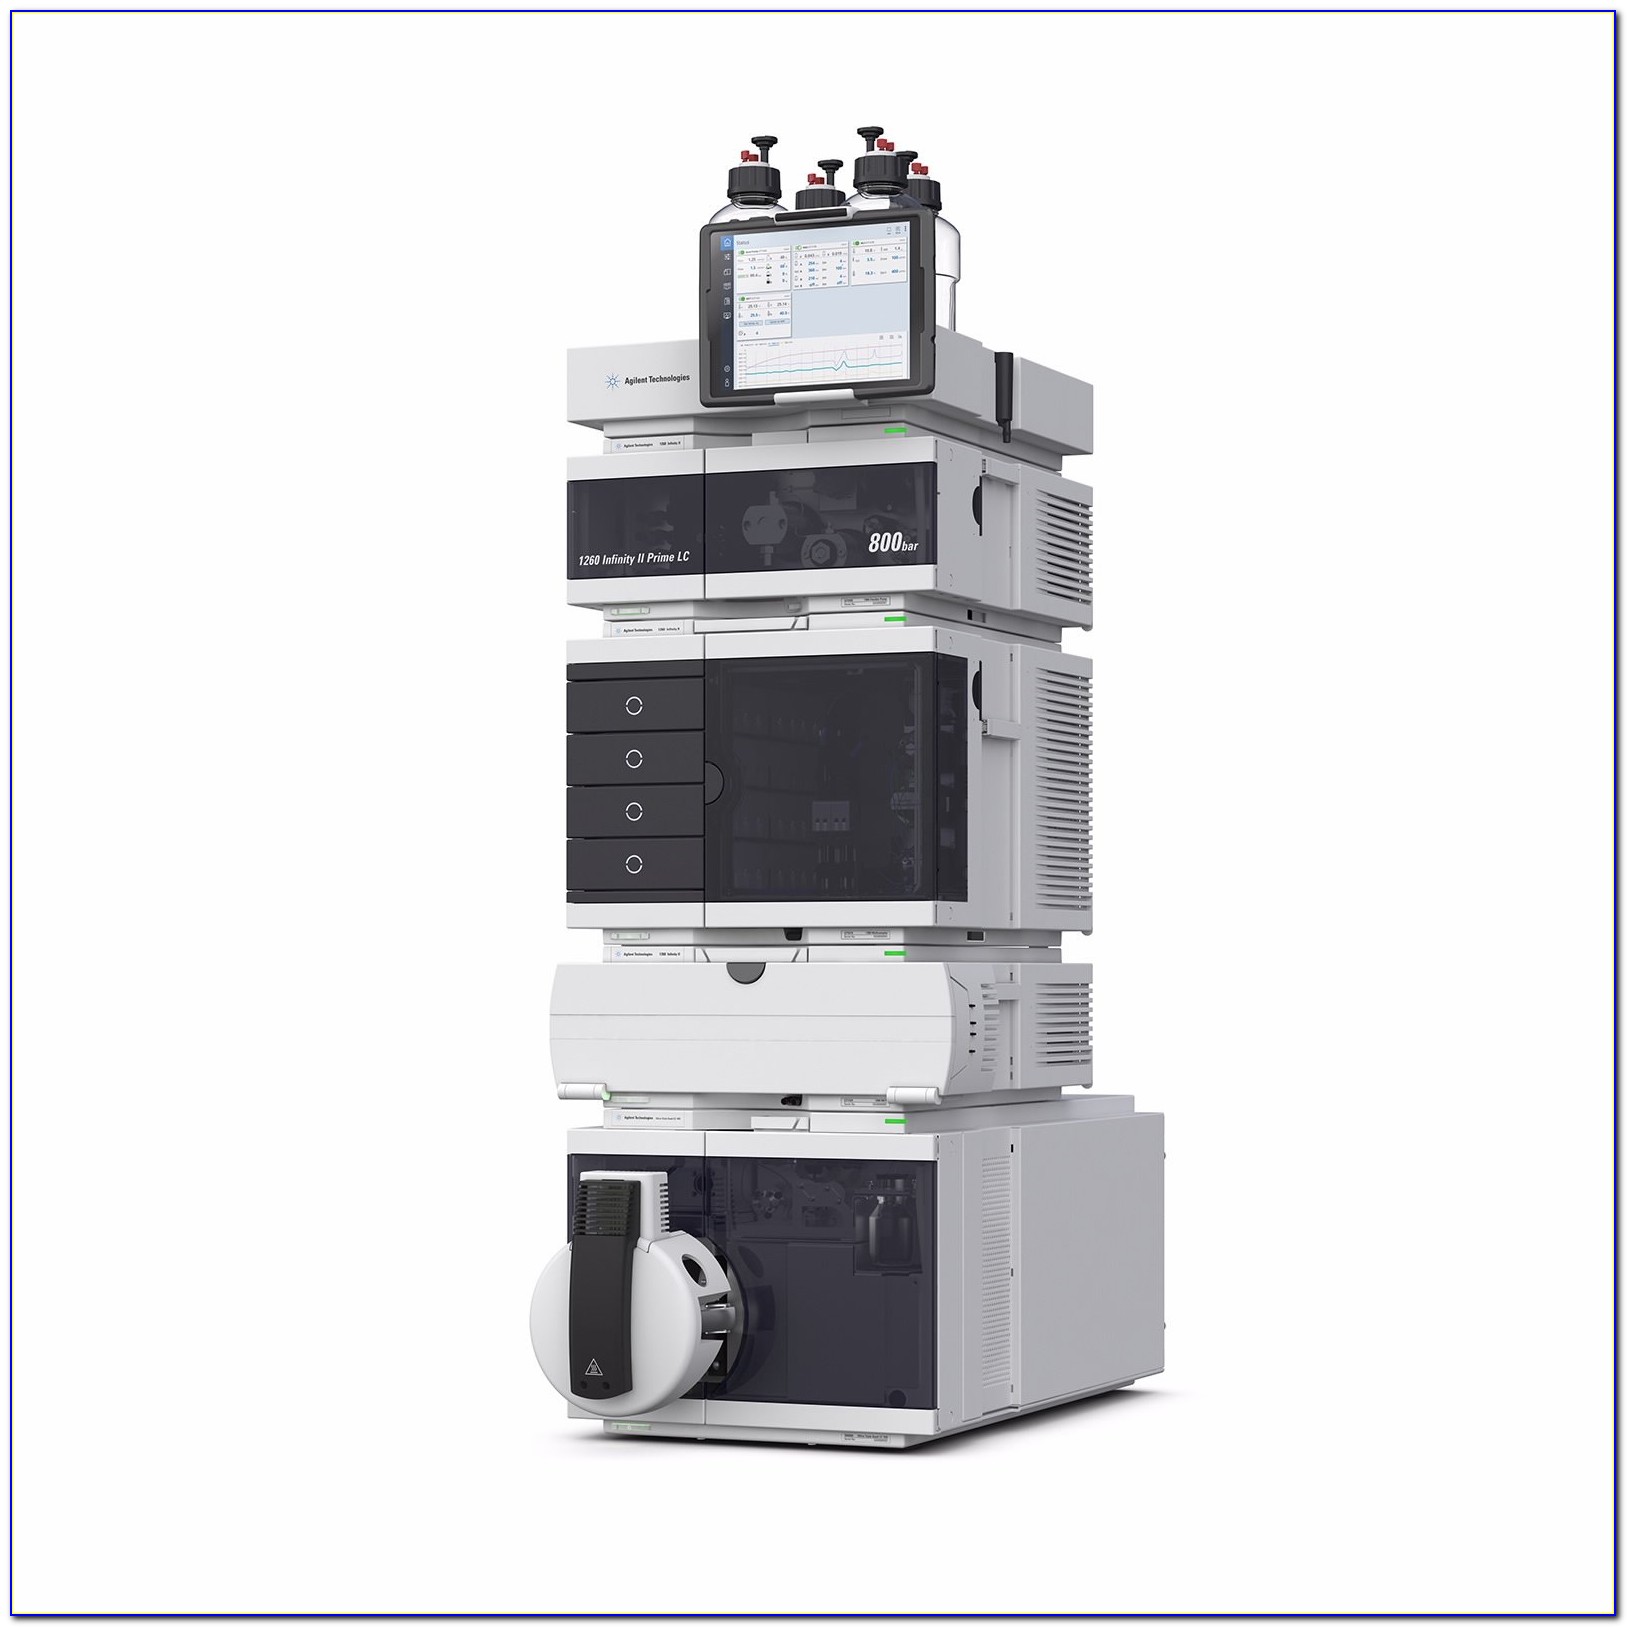 Agilent Ultivo Specifications